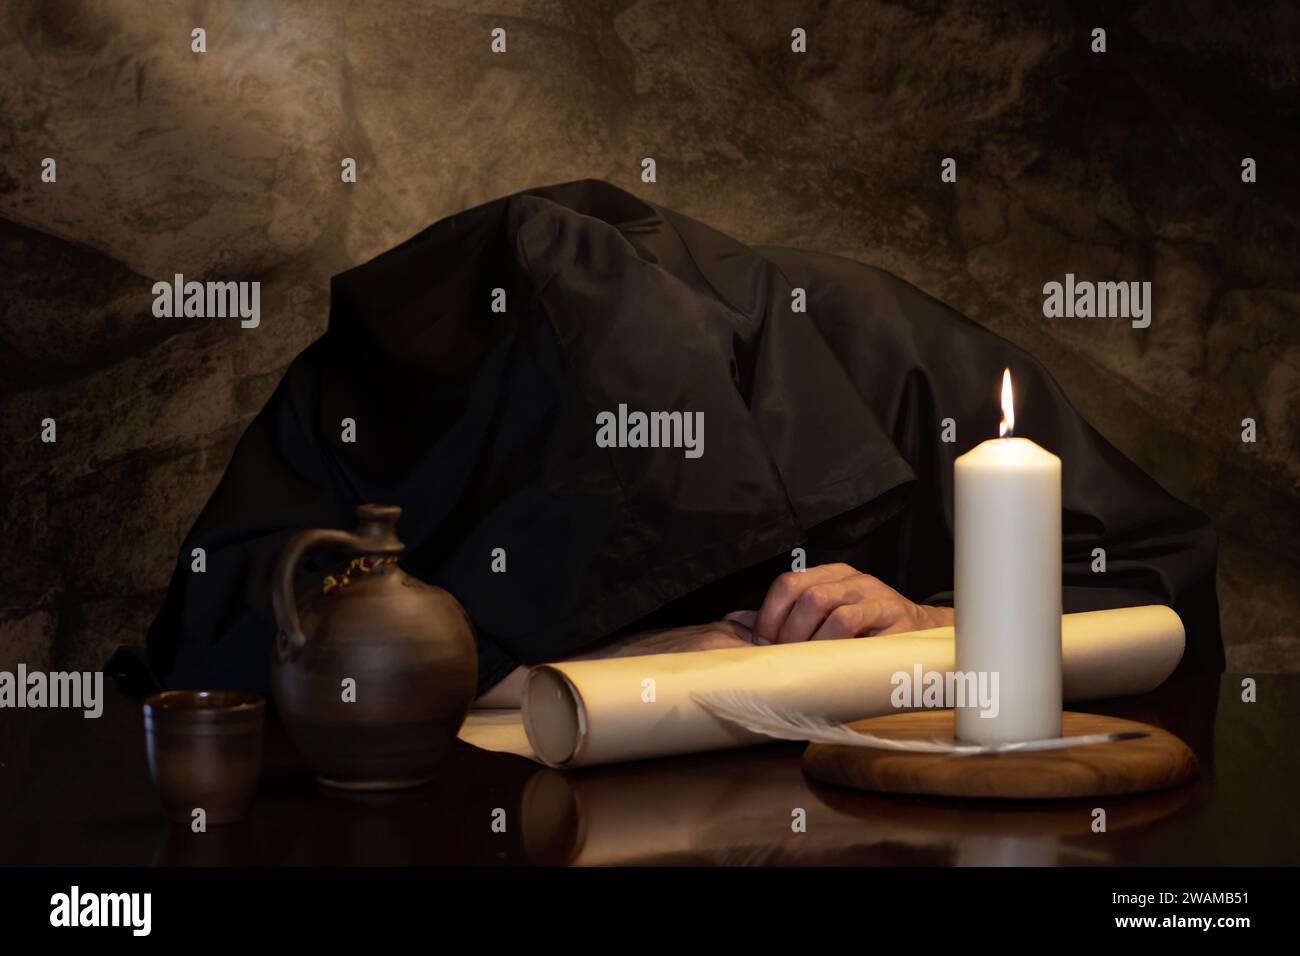 A monk in a black cassock fell asleep drunk at a table with a jug of wine in a medieval coaching inn. Concept: drunkenness and alcoholism. Stock Photo